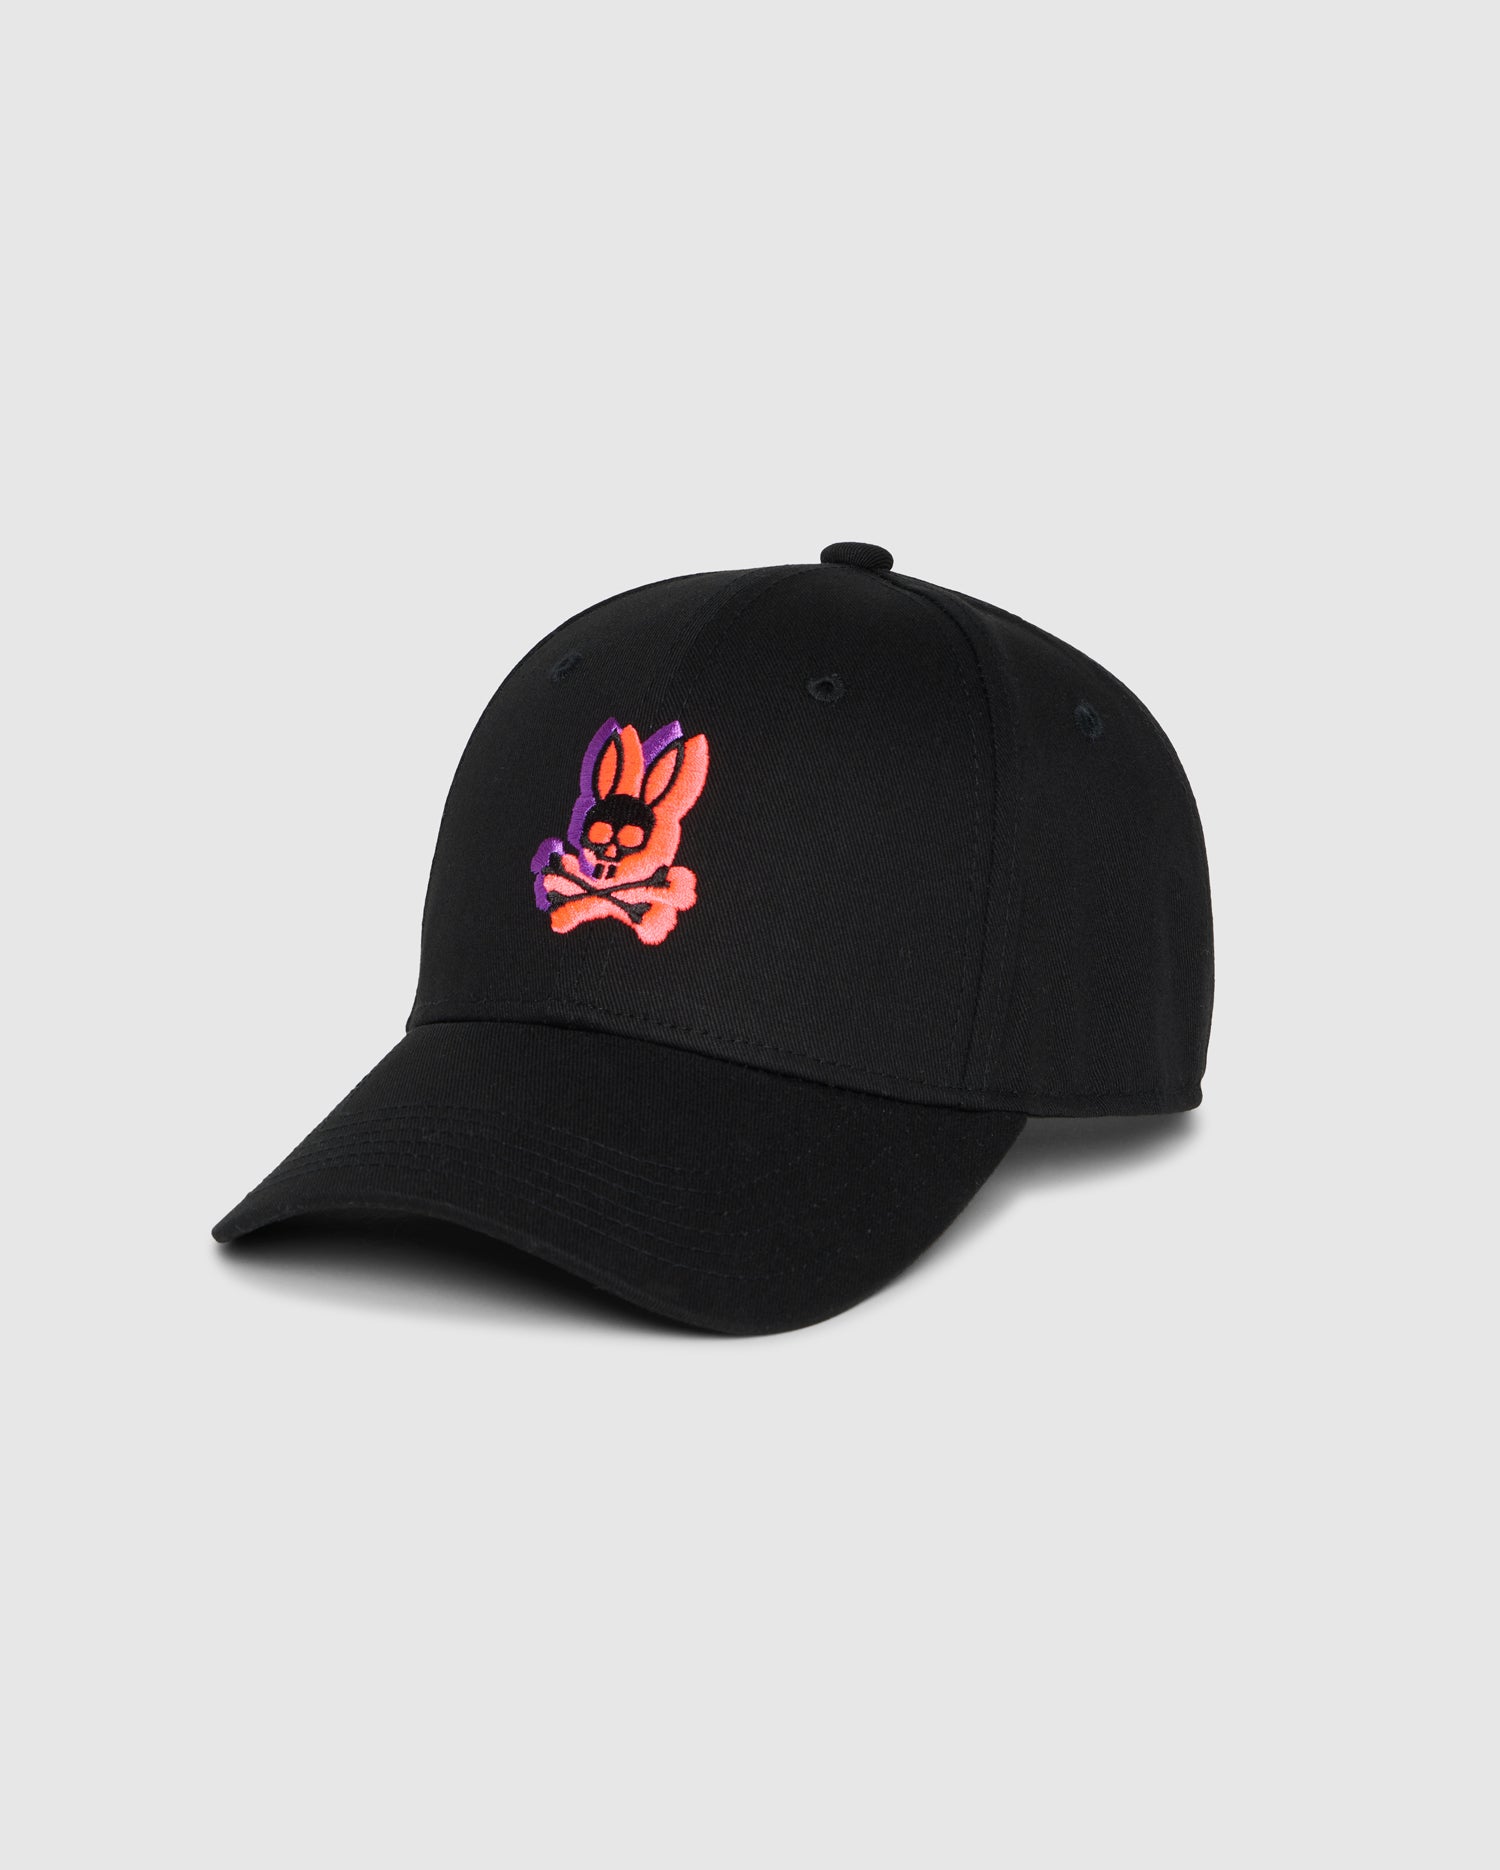 A black Psycho Bunny MENS GROVES BASEBALL HAT - B6A556C2HT featuring a small embroidered design of a cartoonish pink and purple bunny face over crossed bones on the front. The snapback baseball hat is displayed against a plain light grey background.